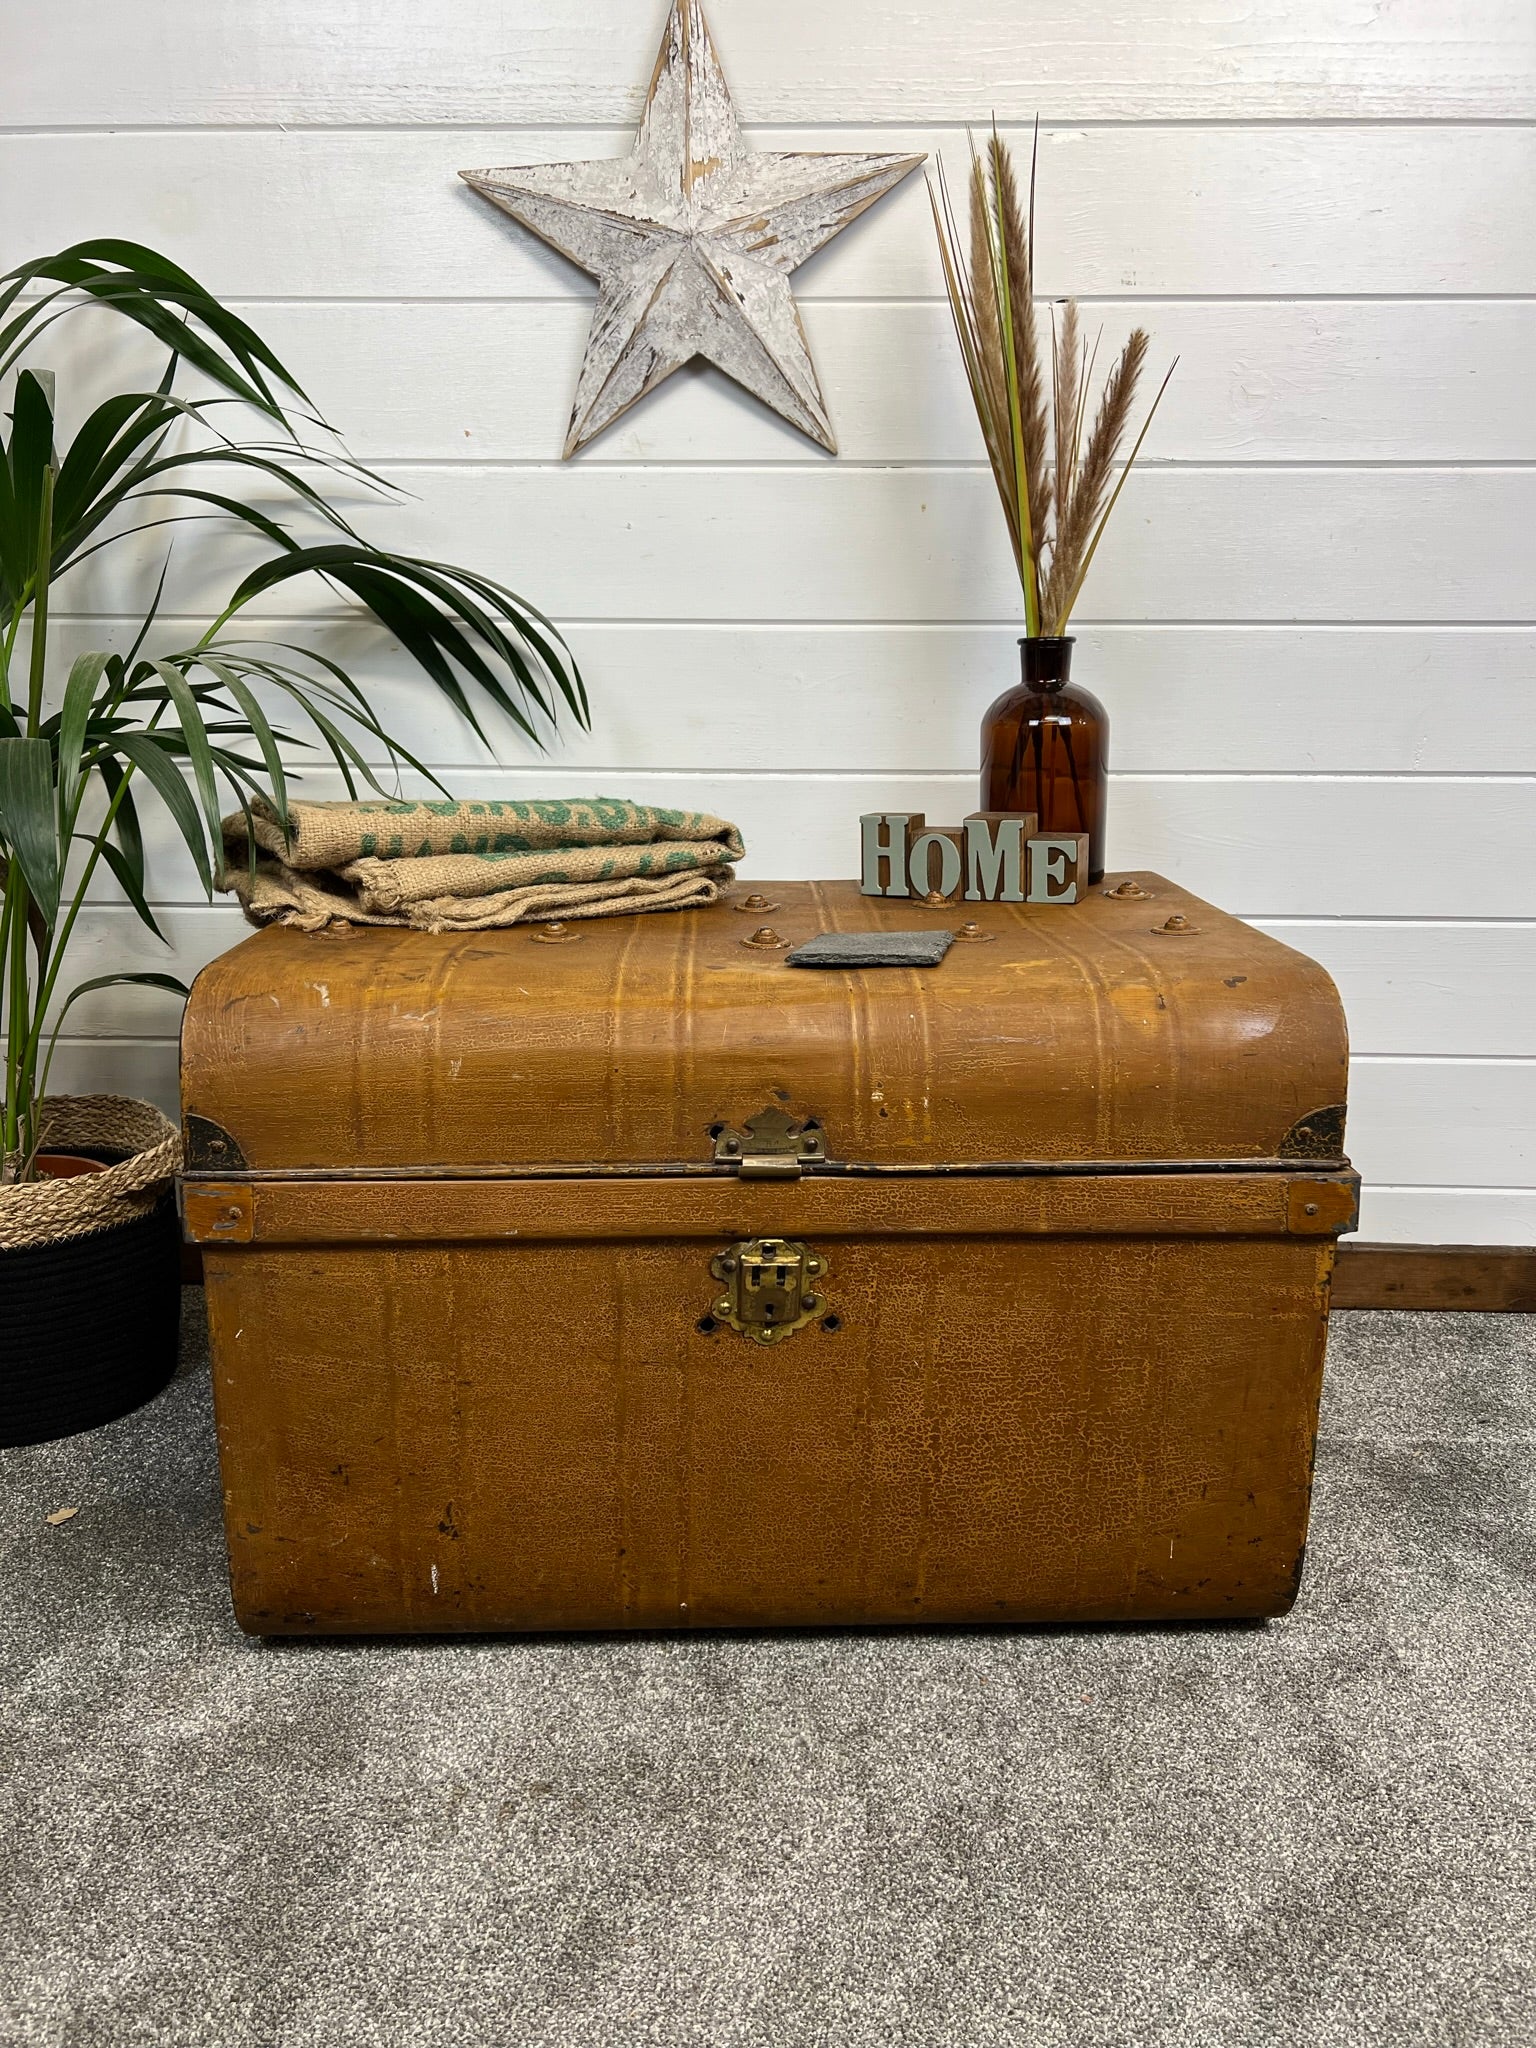 Large Antique Steamer Travel Trunk, Shipping Trunk, Travel Suitcase, etc.  As Is